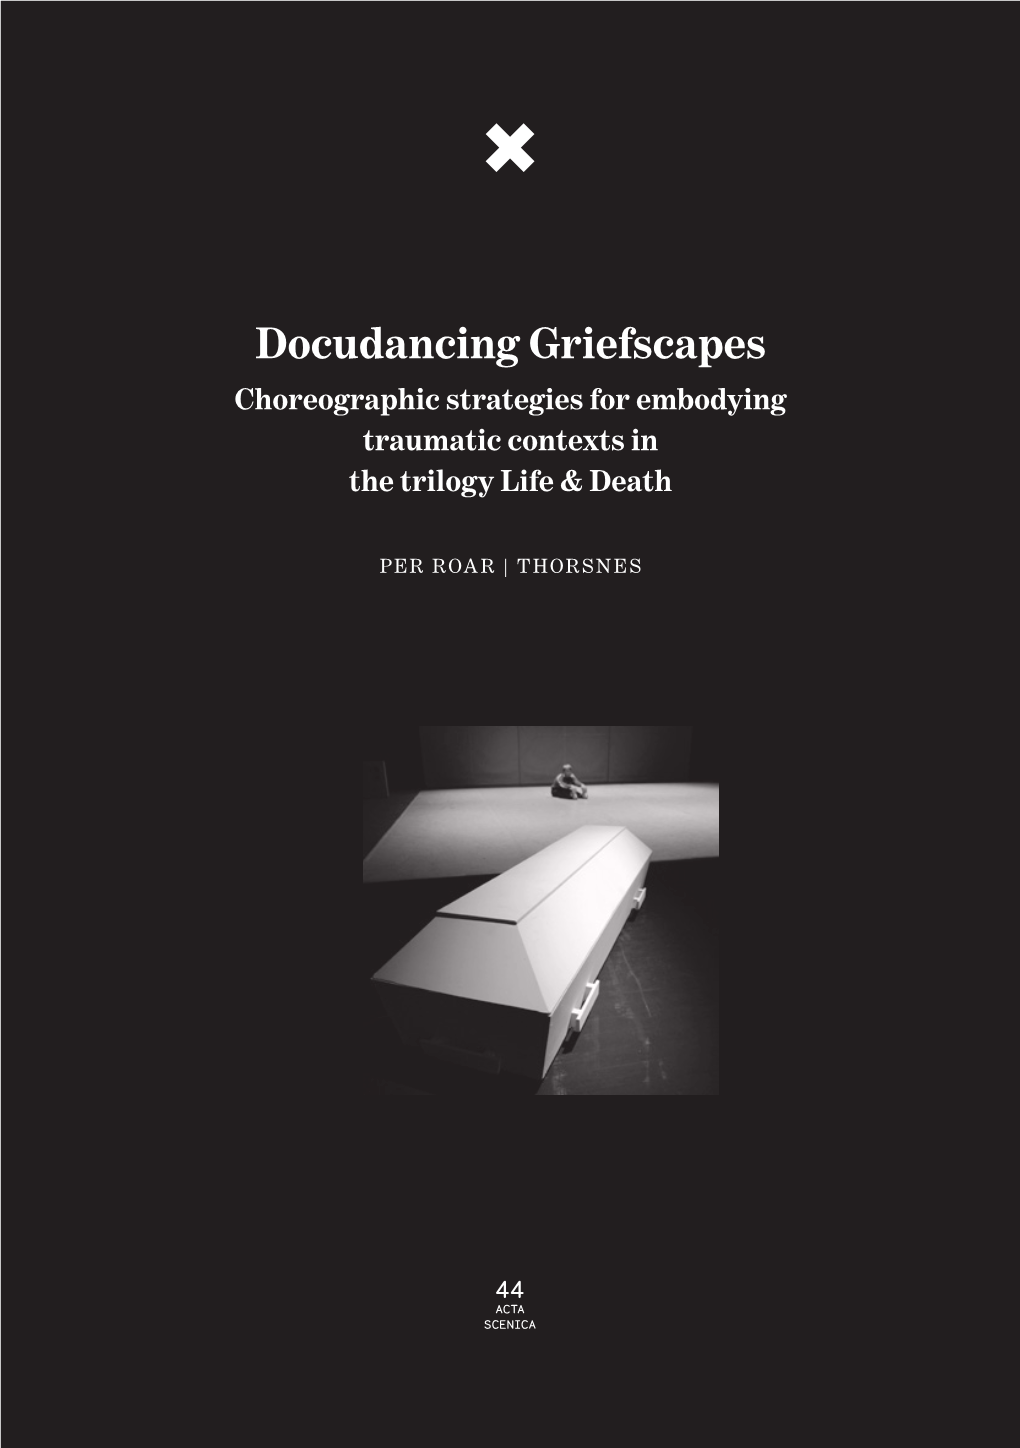 Docudancing Griefscapes Choreographic Strategies for Embodying Traumatic Contexts in the Trilogy Life & Death